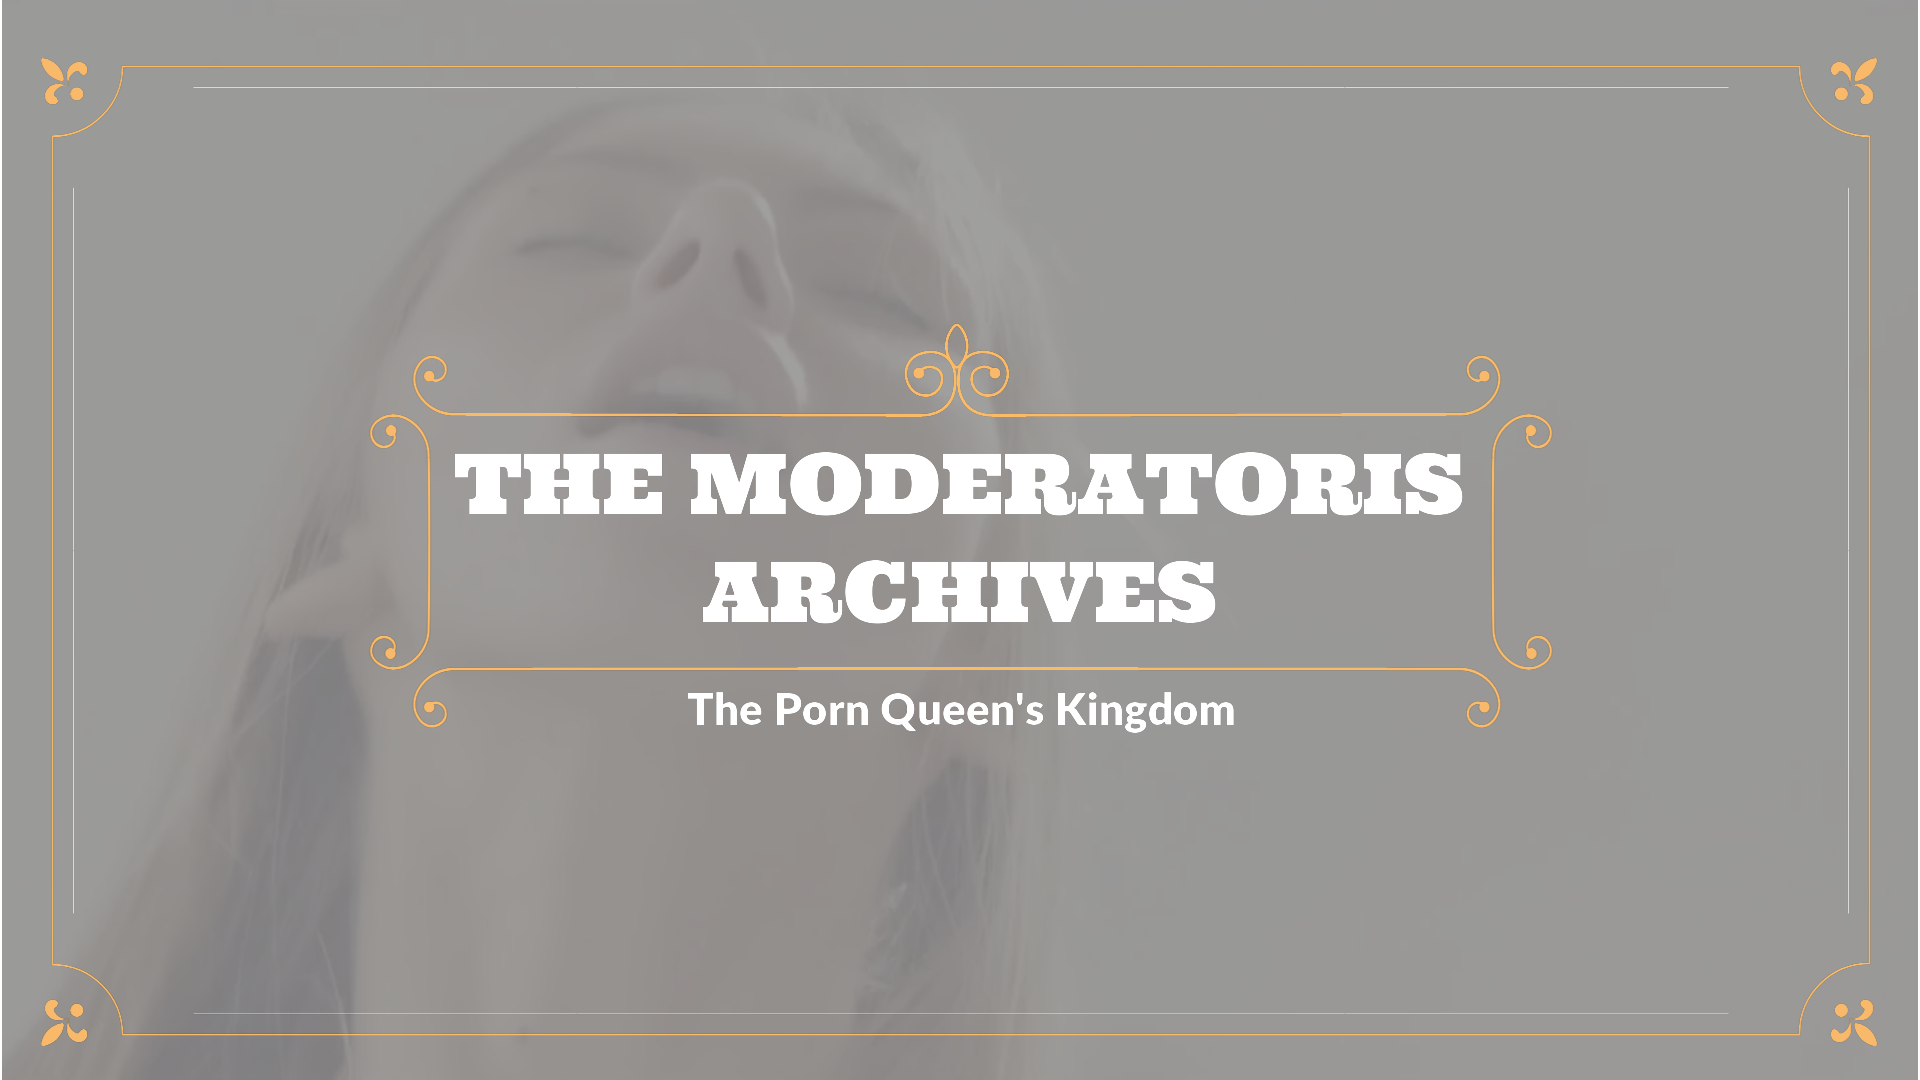 [Cock Hero] The Moderatoris Archives - The Porn Queen's Kingdom.png